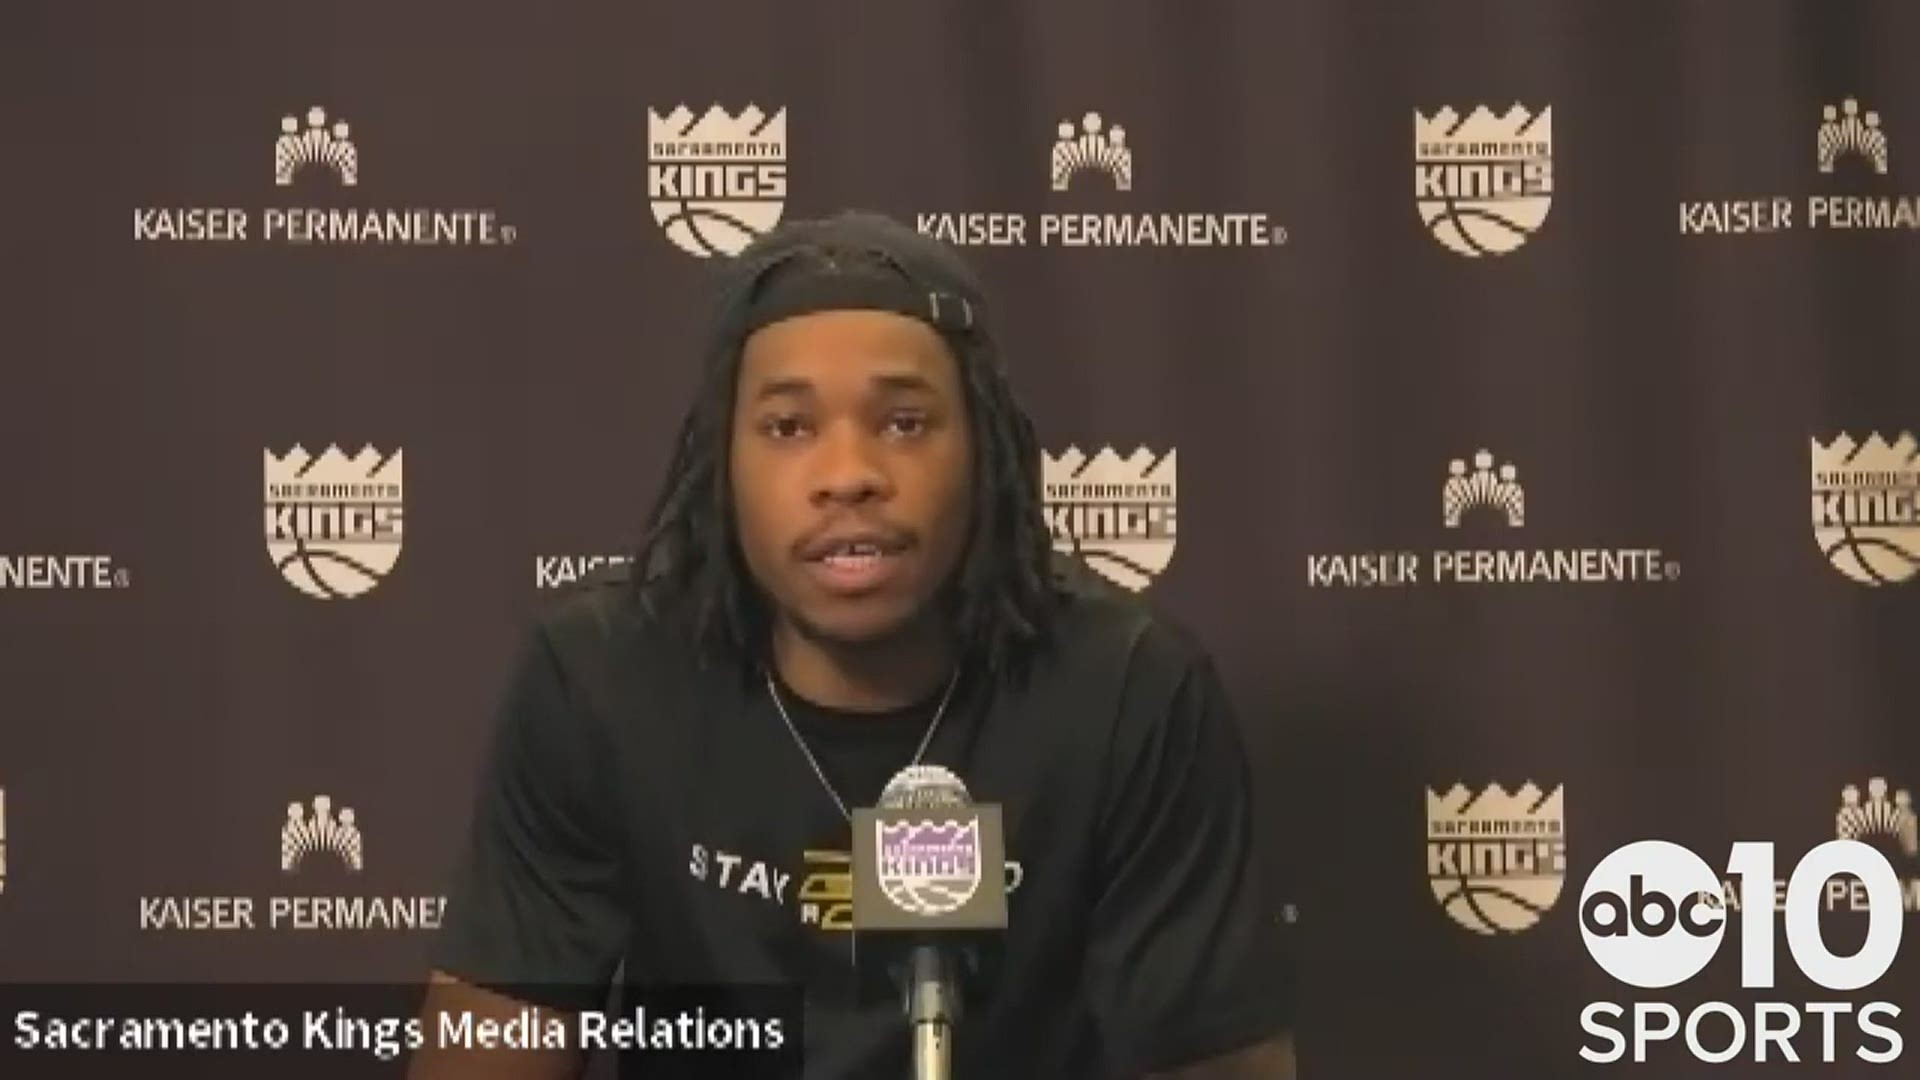 Richaun Holmes discusses his offseason ahead after a disappointing Kings season, being an unrestricted free agent, his decision ahead & unknown future in Sacramento.